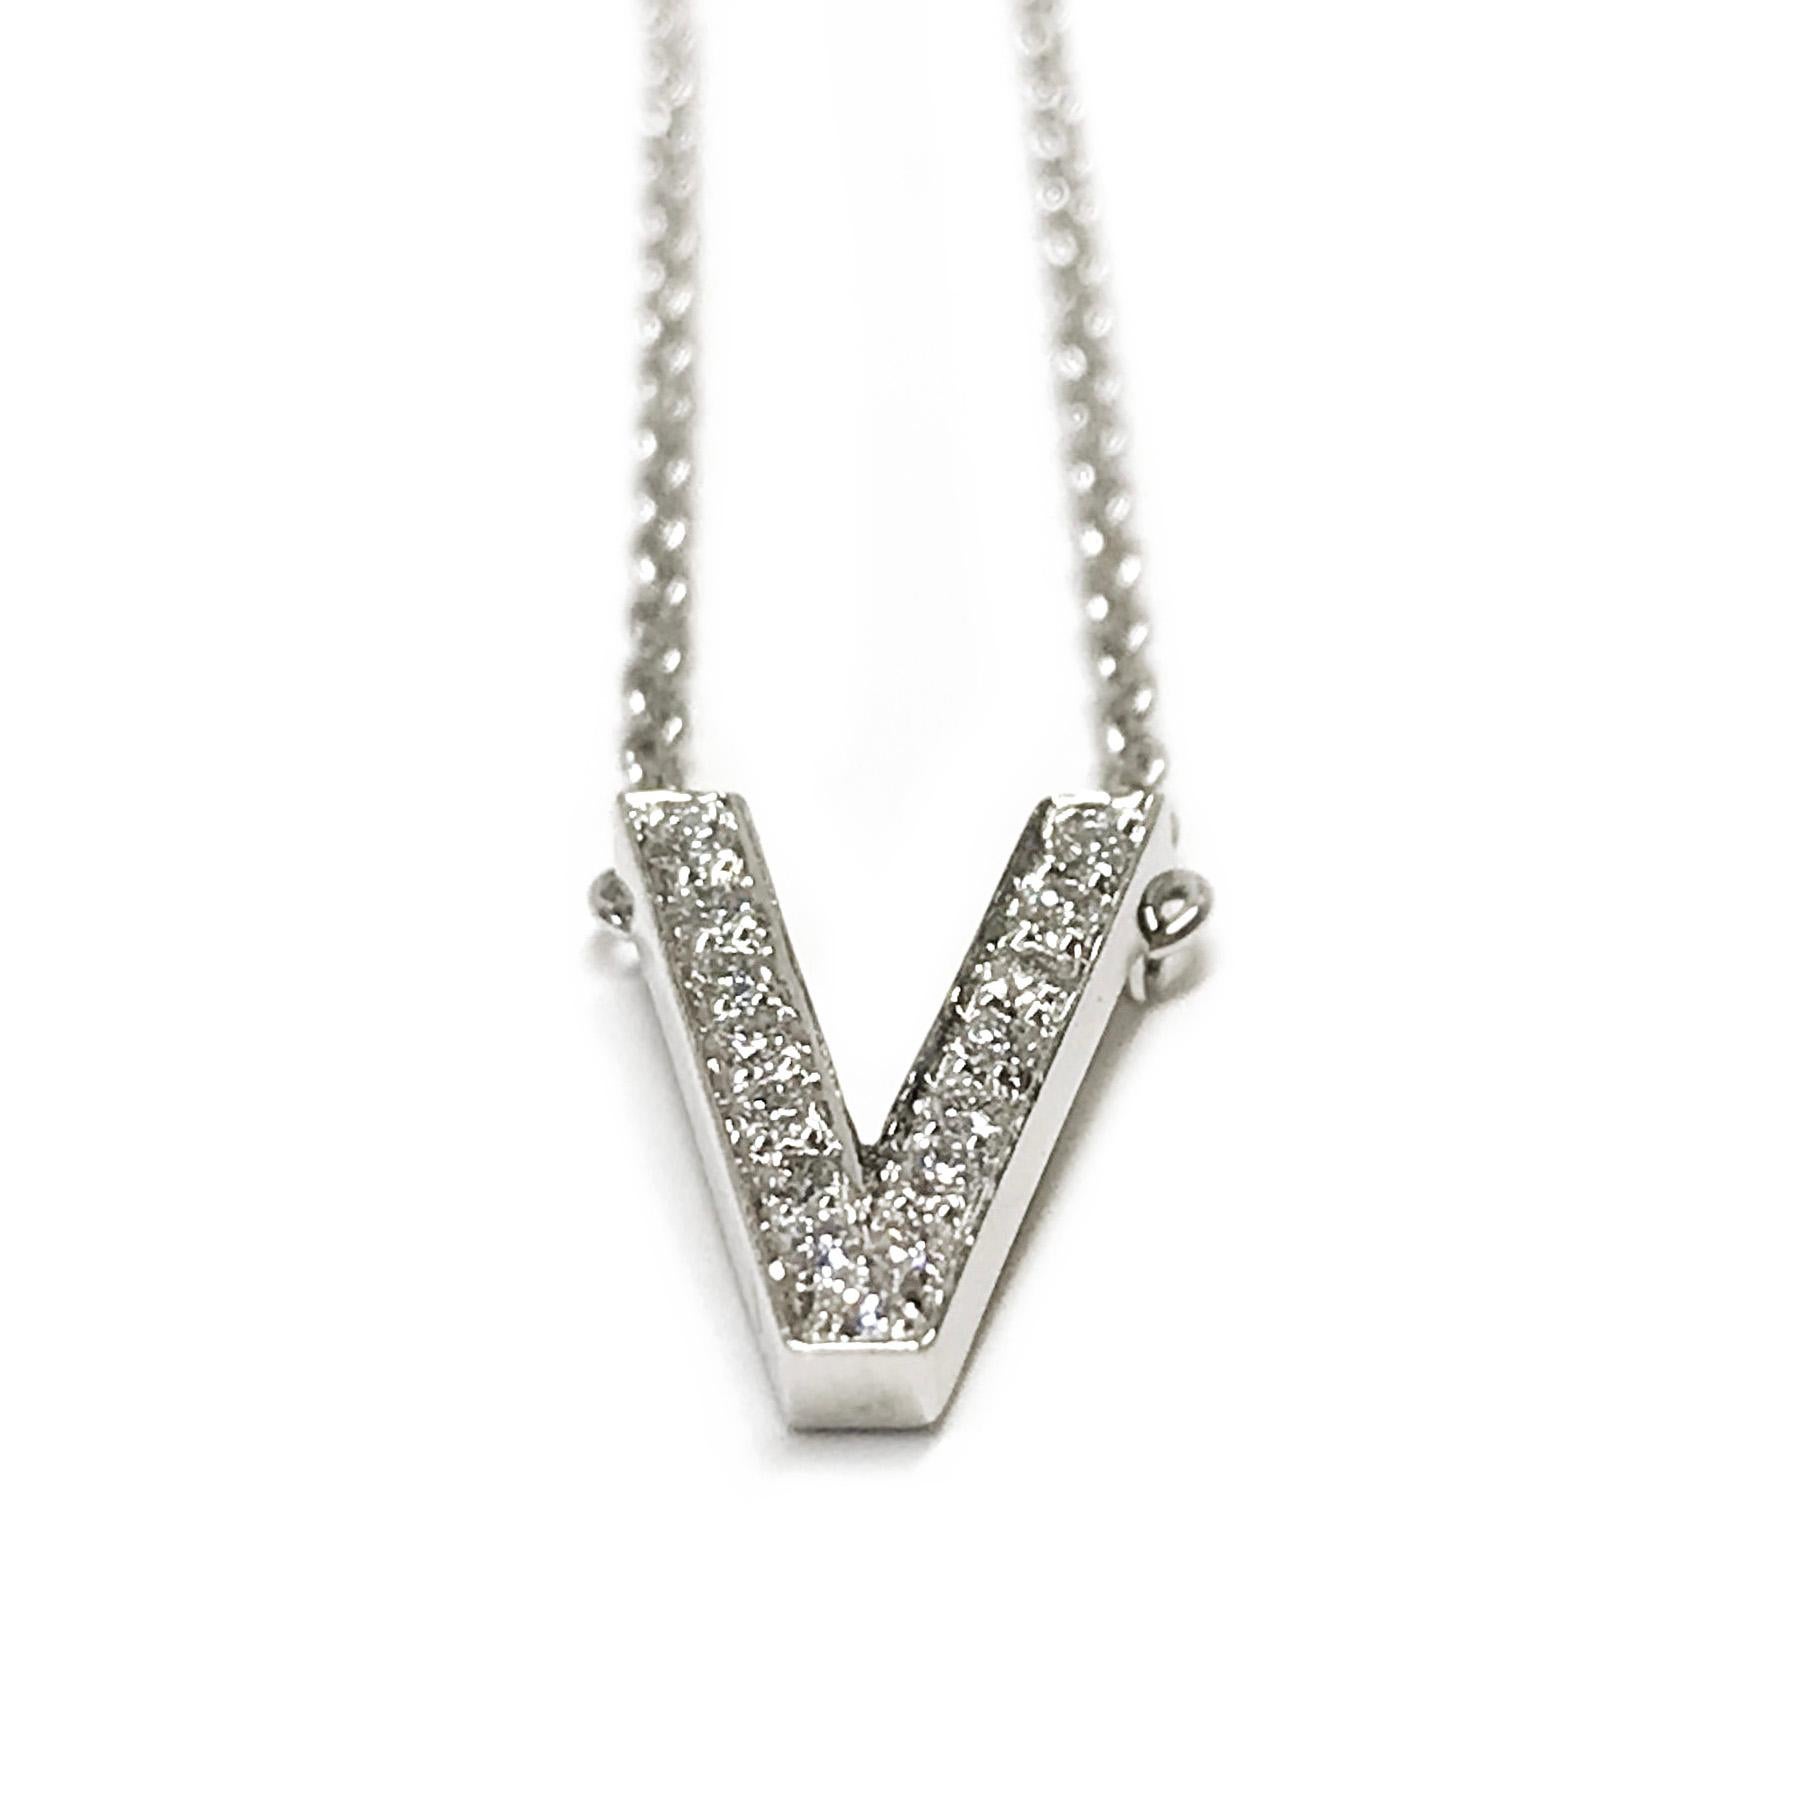 Tiffany & Co. Platinum Diamond V Pendant Necklace with fifteen round brilliant-cut diamonds. The diamonds are pave-set in a V shape. Diamonds are VS in clarity (G.I.A.) and G in color (G.I.A.) and 0.18 total carat weight. The hallmark stamp on the